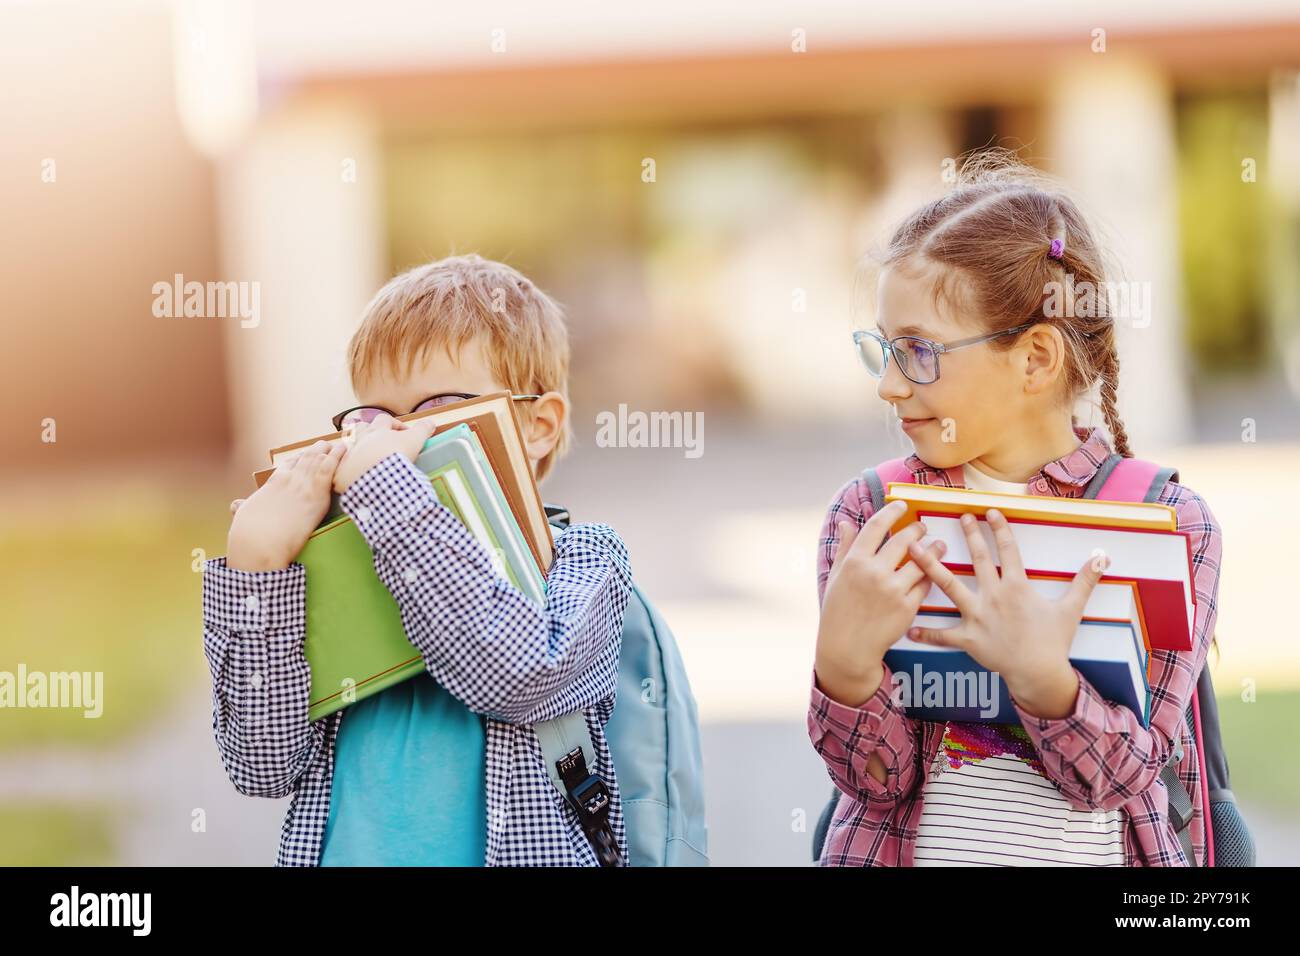 Girl and boy in glasses standing with books in their hands. Stock Photo